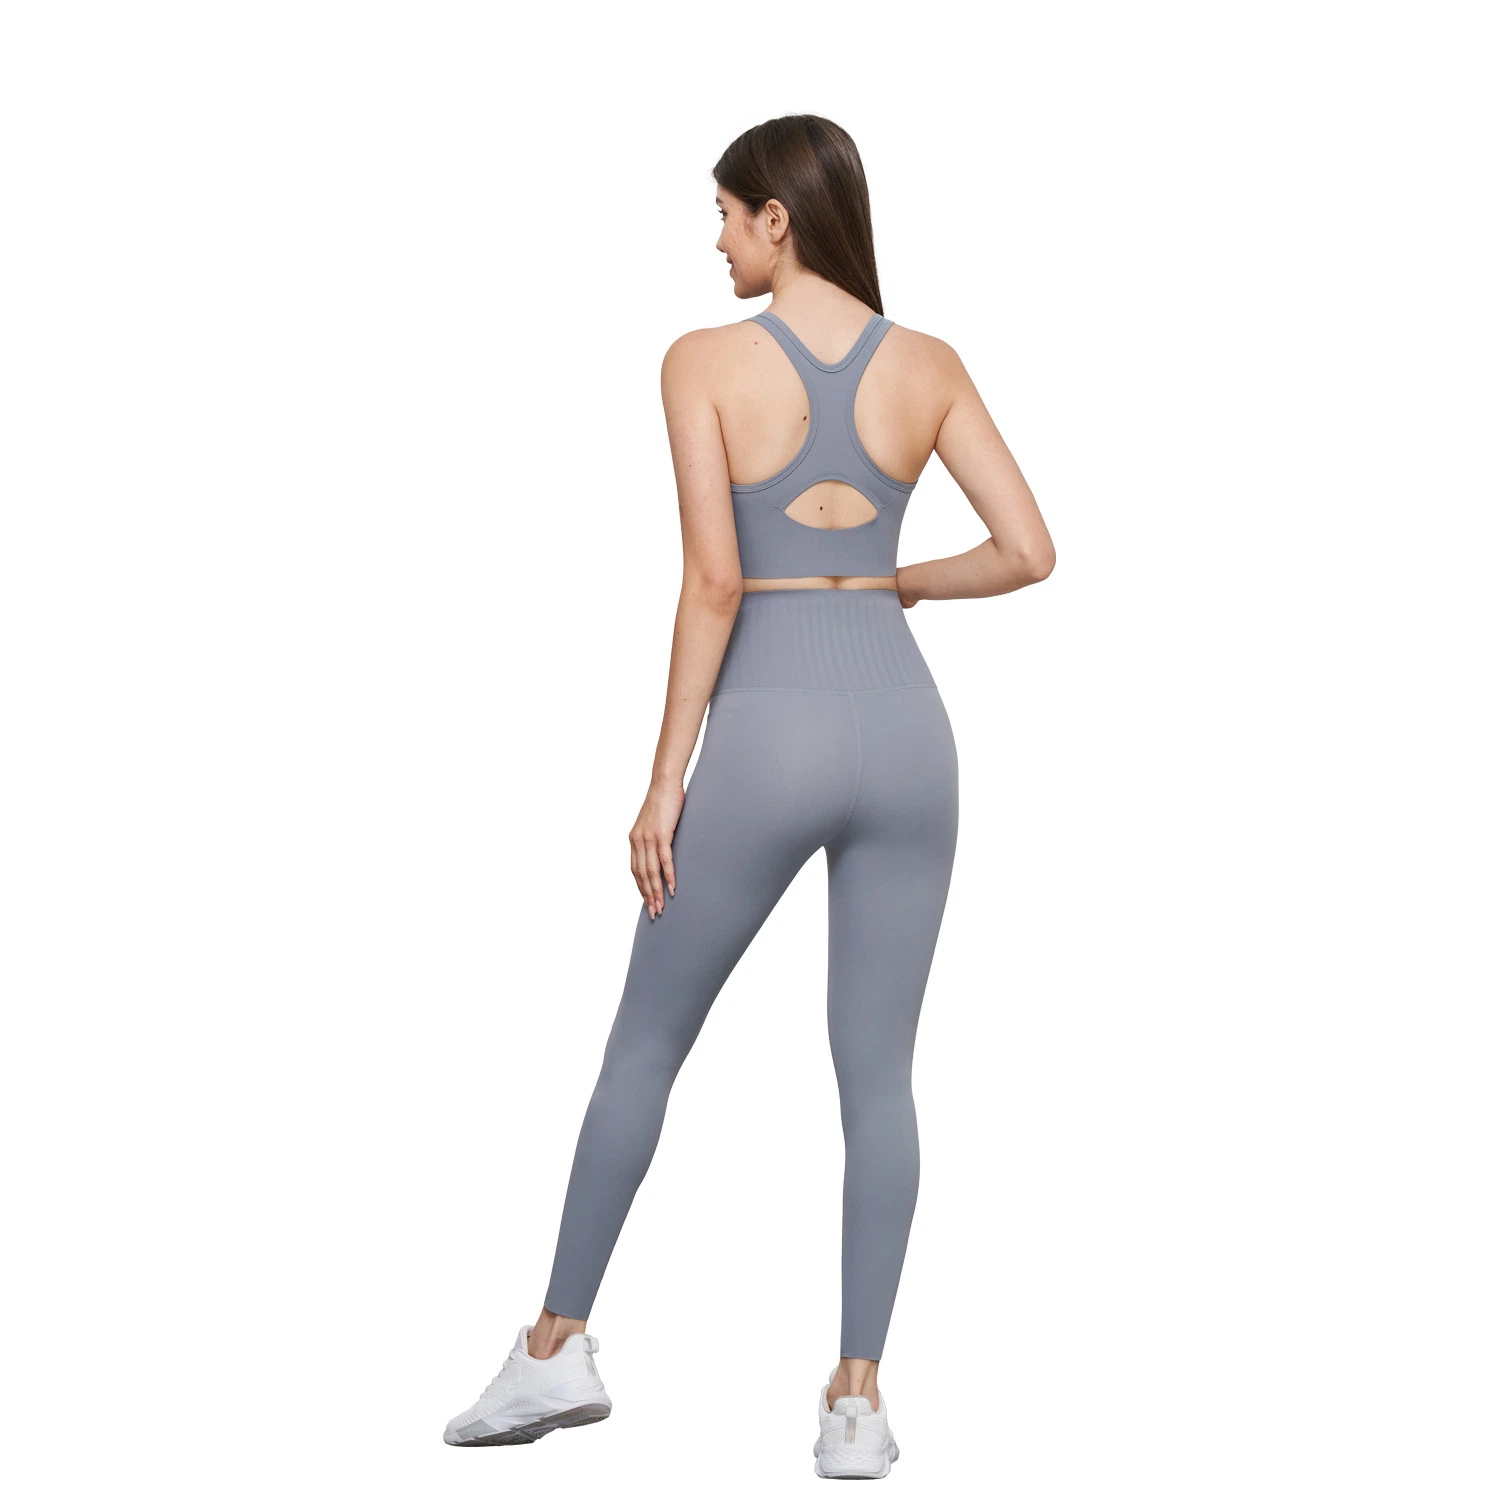 Ck1546 High quality/High cost performance  Sportswear Gym Yoga Workout Leggings for Women